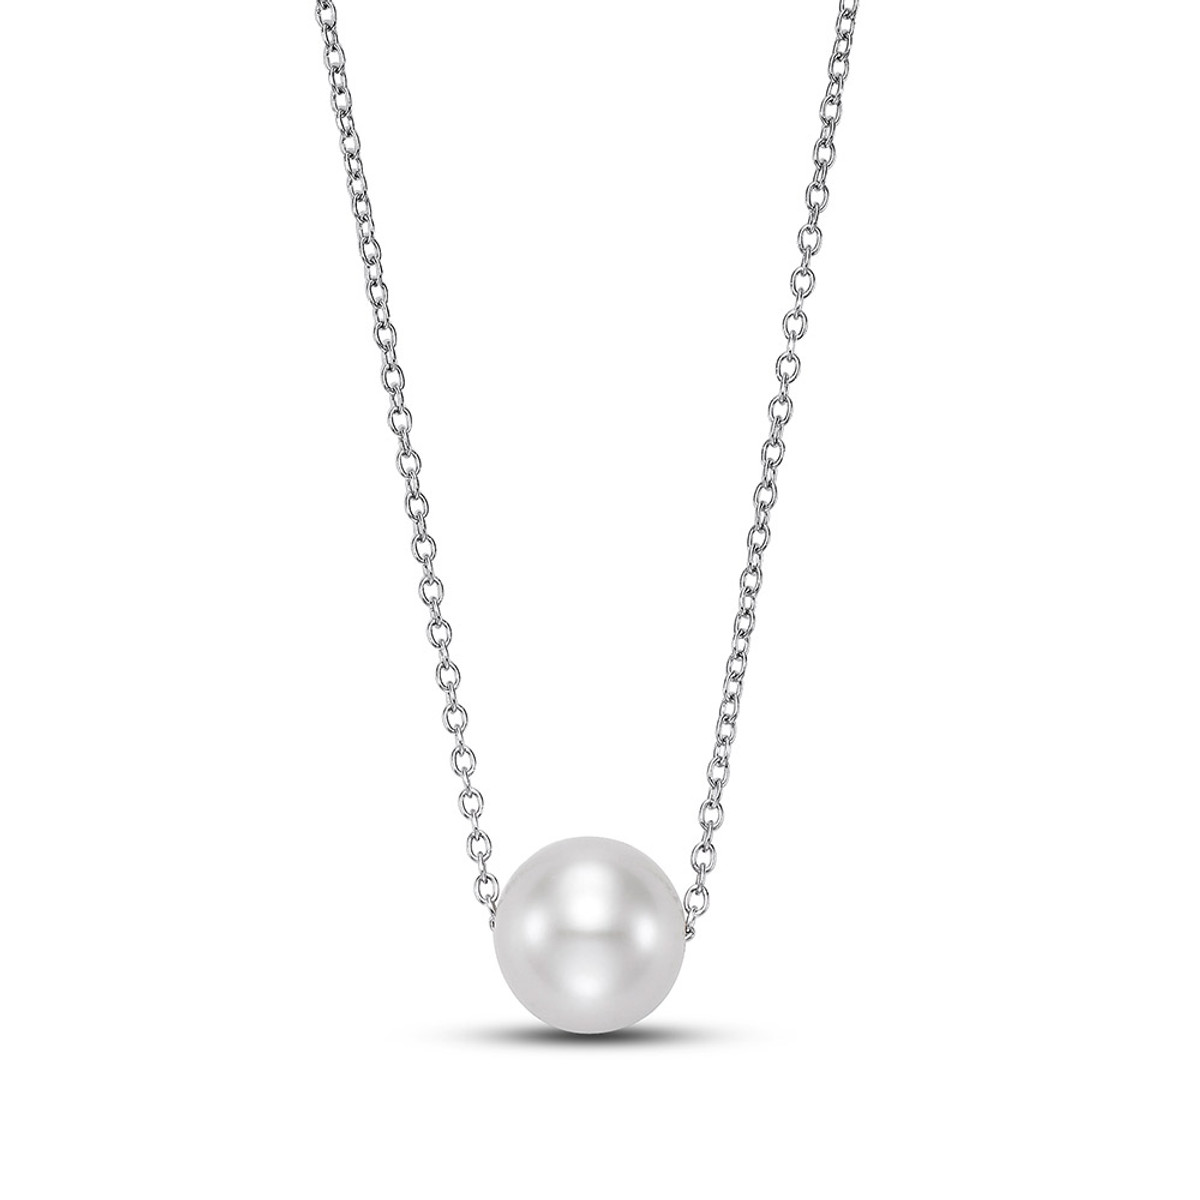 Hyde Park 14K White Gold Pearl Pendant. Solitaire-25826 Product Image